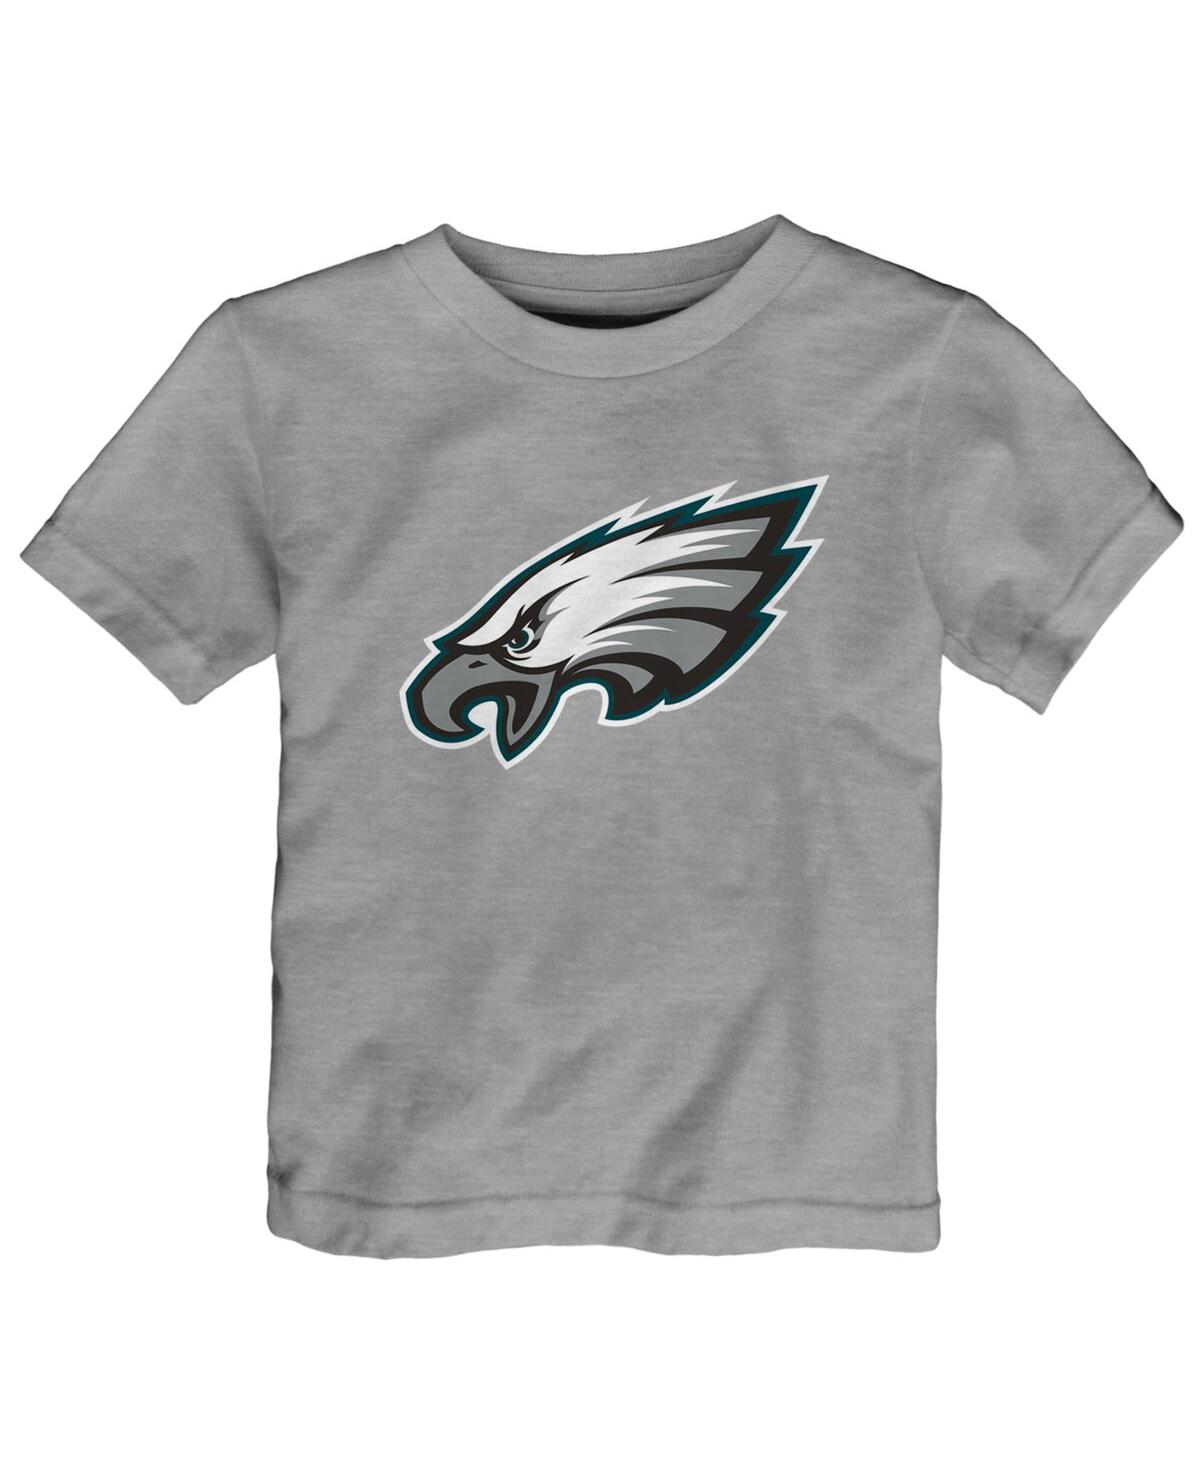 Shop Outerstuff Toddler Boys And Girls Heather Gray Philadelphia Eagles Primary Logo T-shirt